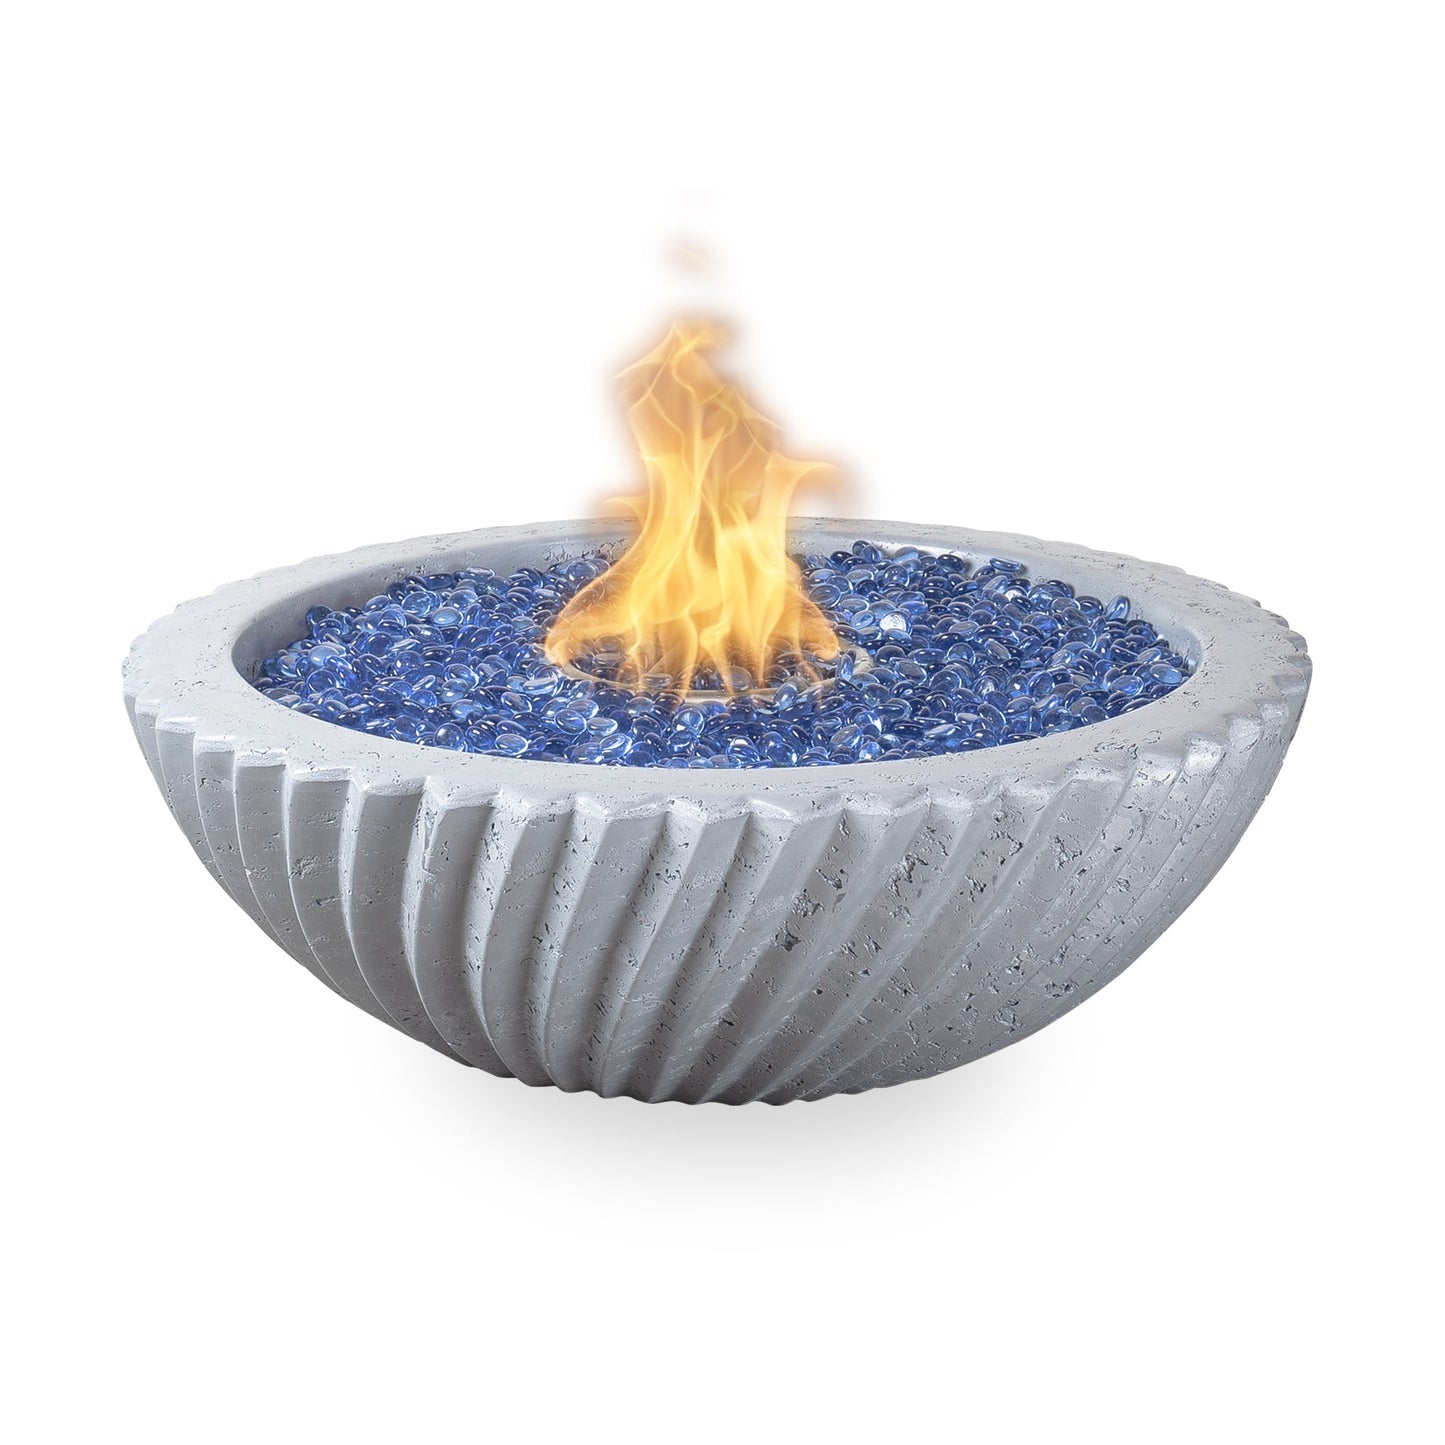 Sedona 2.0 Concrete Fire Bowl - Free Cover by The Outdoor Plus